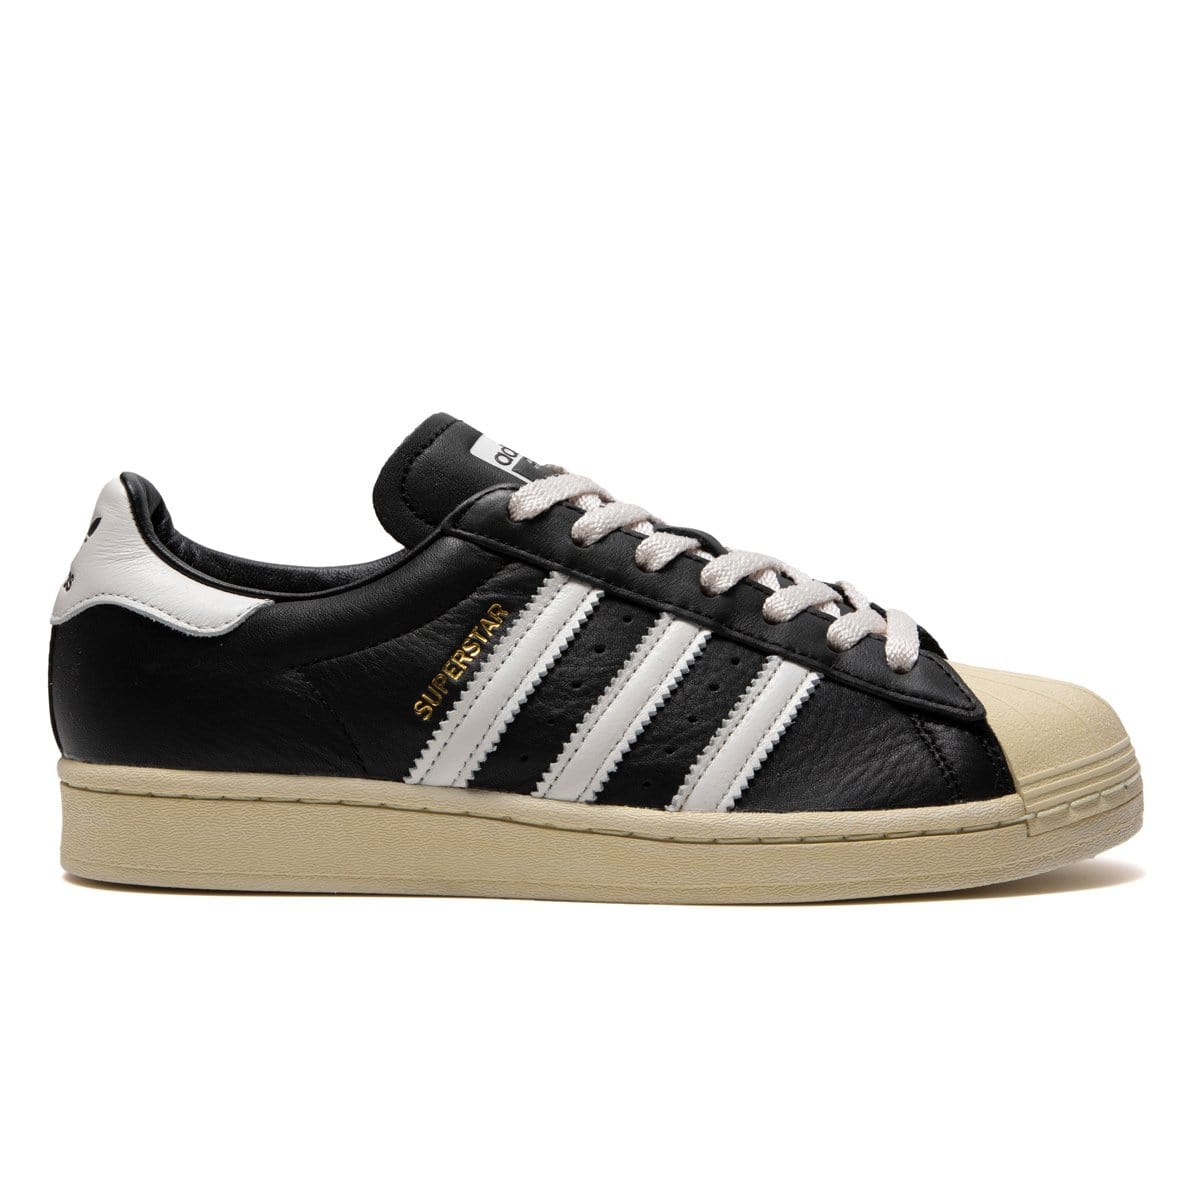 adidas shoes price online